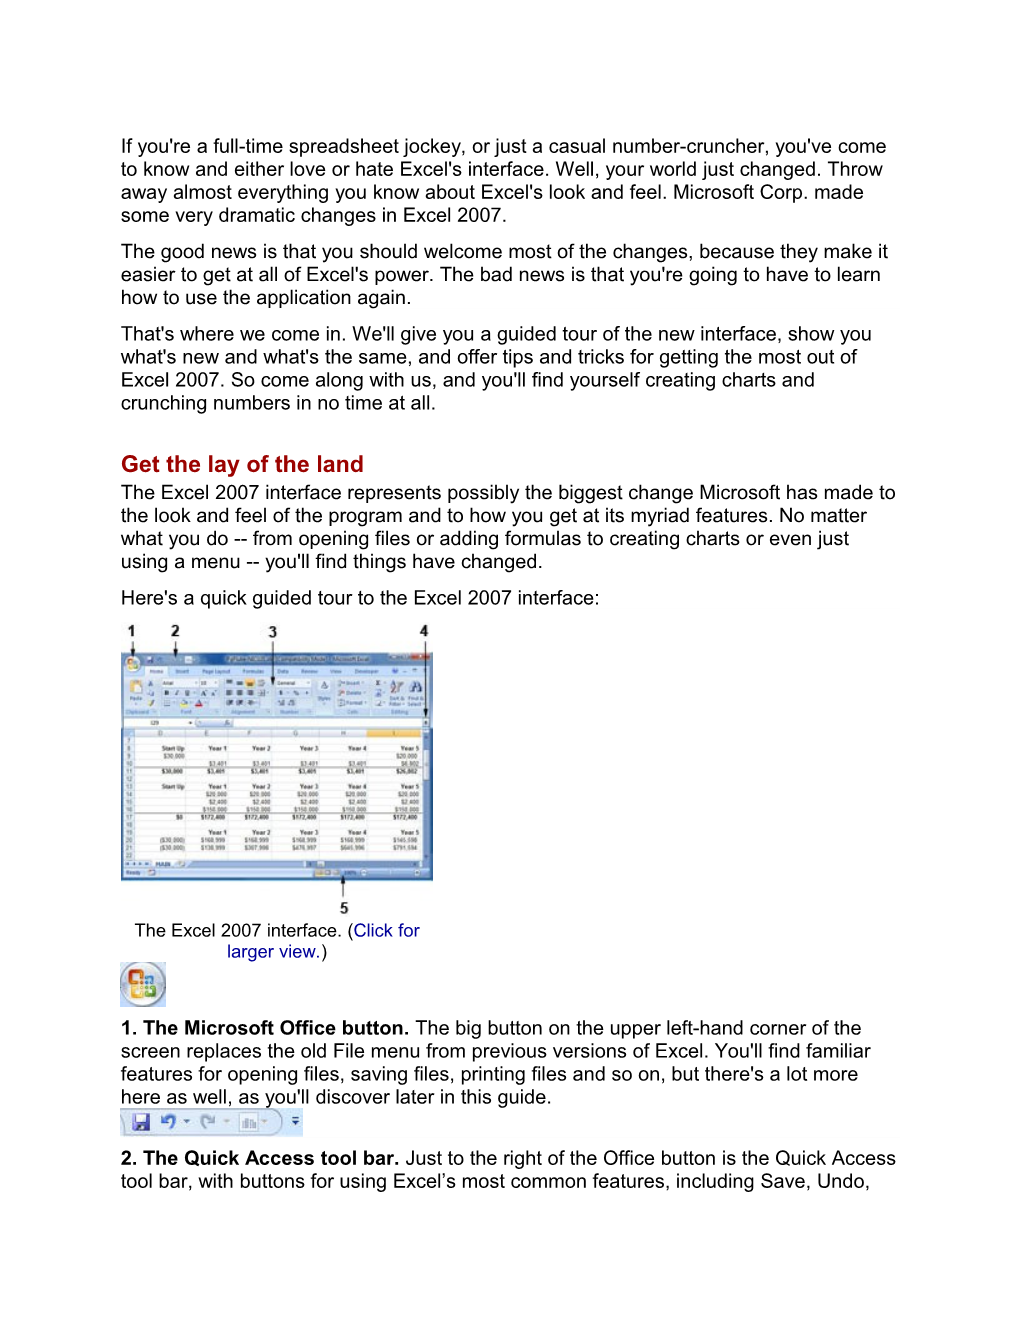 Here's a Quick Guided Tour to the Excel 2007 Interface